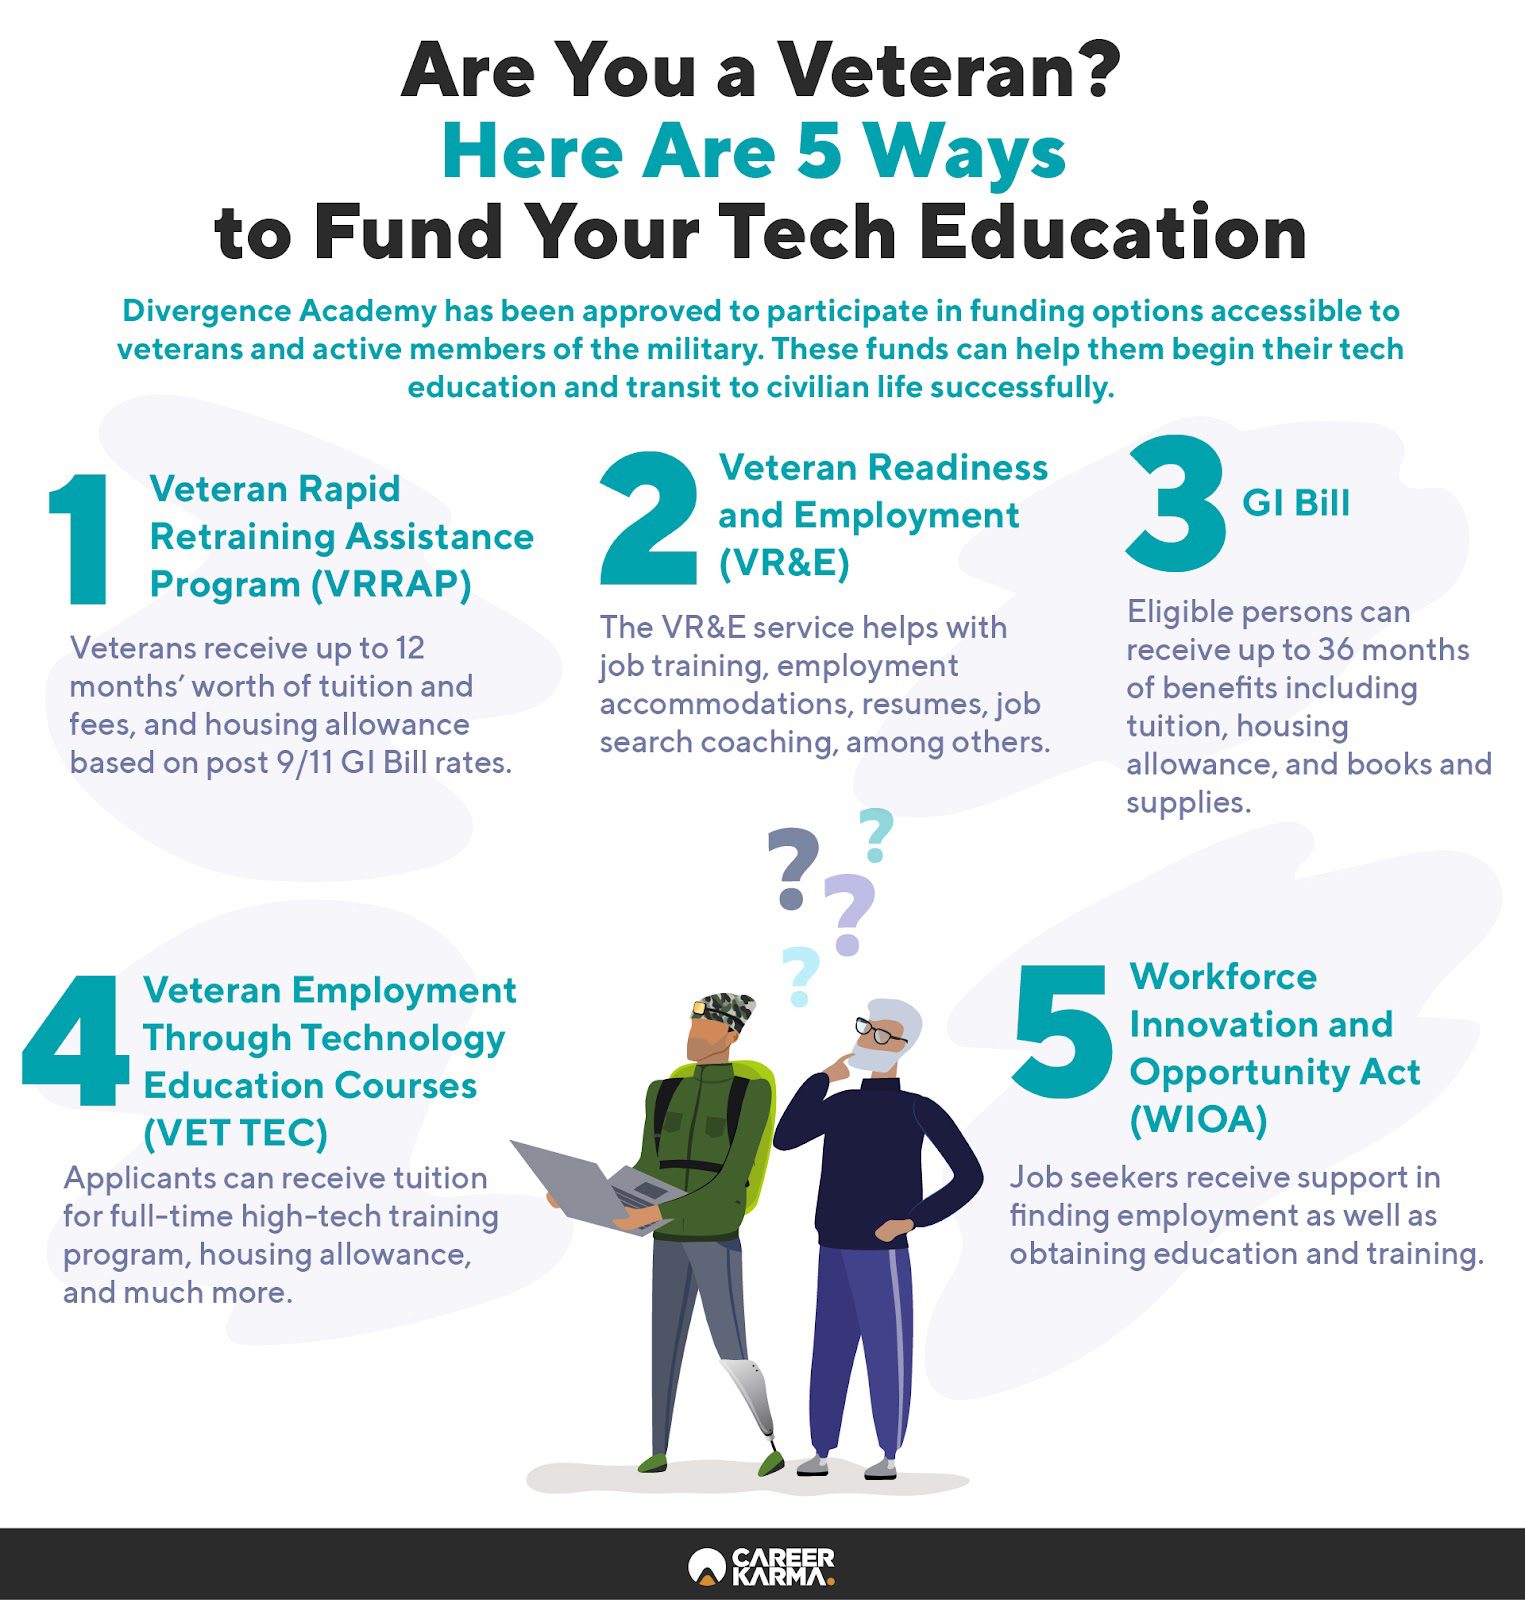 An infographic showing how veterans can fund their tech education at Divergence Academy